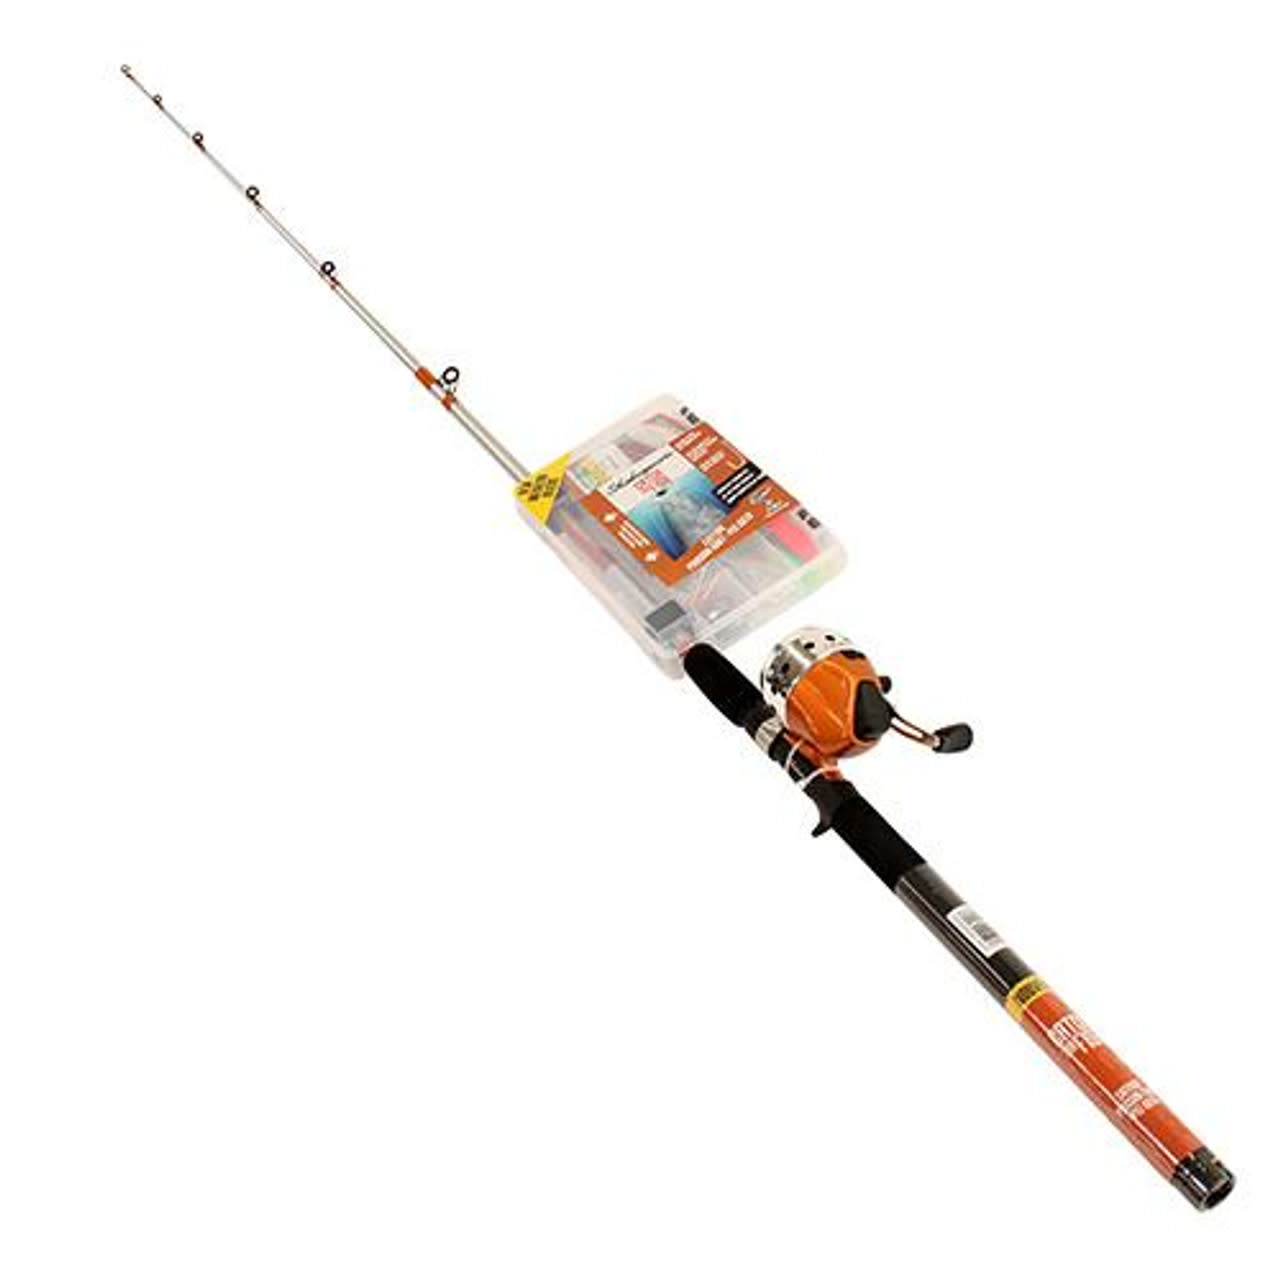 Shakespeare Catch More Fish Spinning Rod and Reel Combo, 7